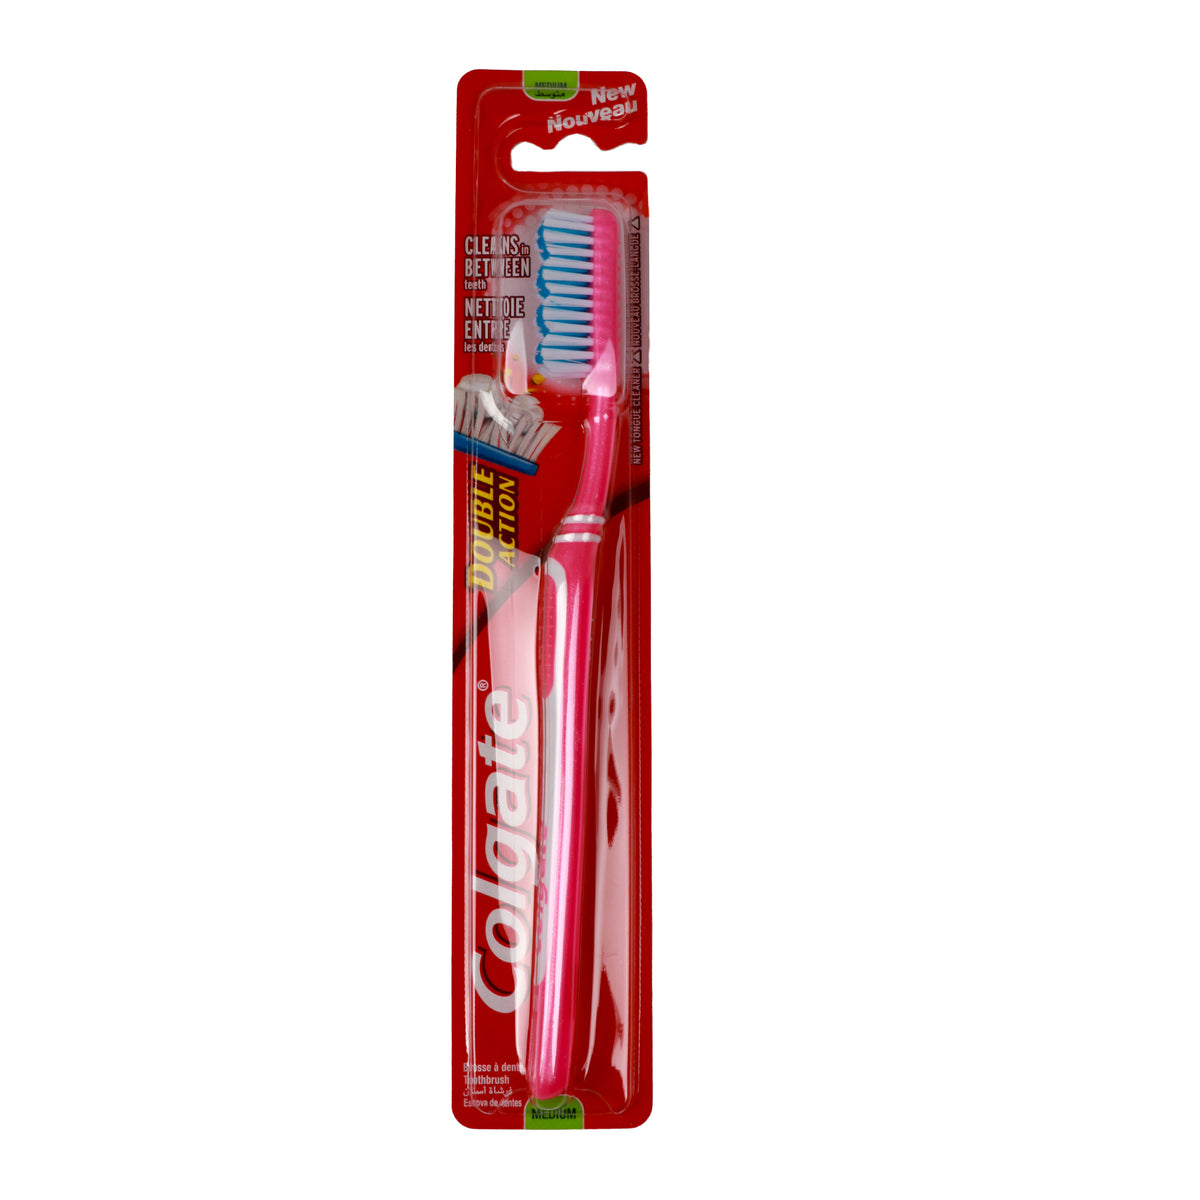 Colgate Double Action Toothbrush